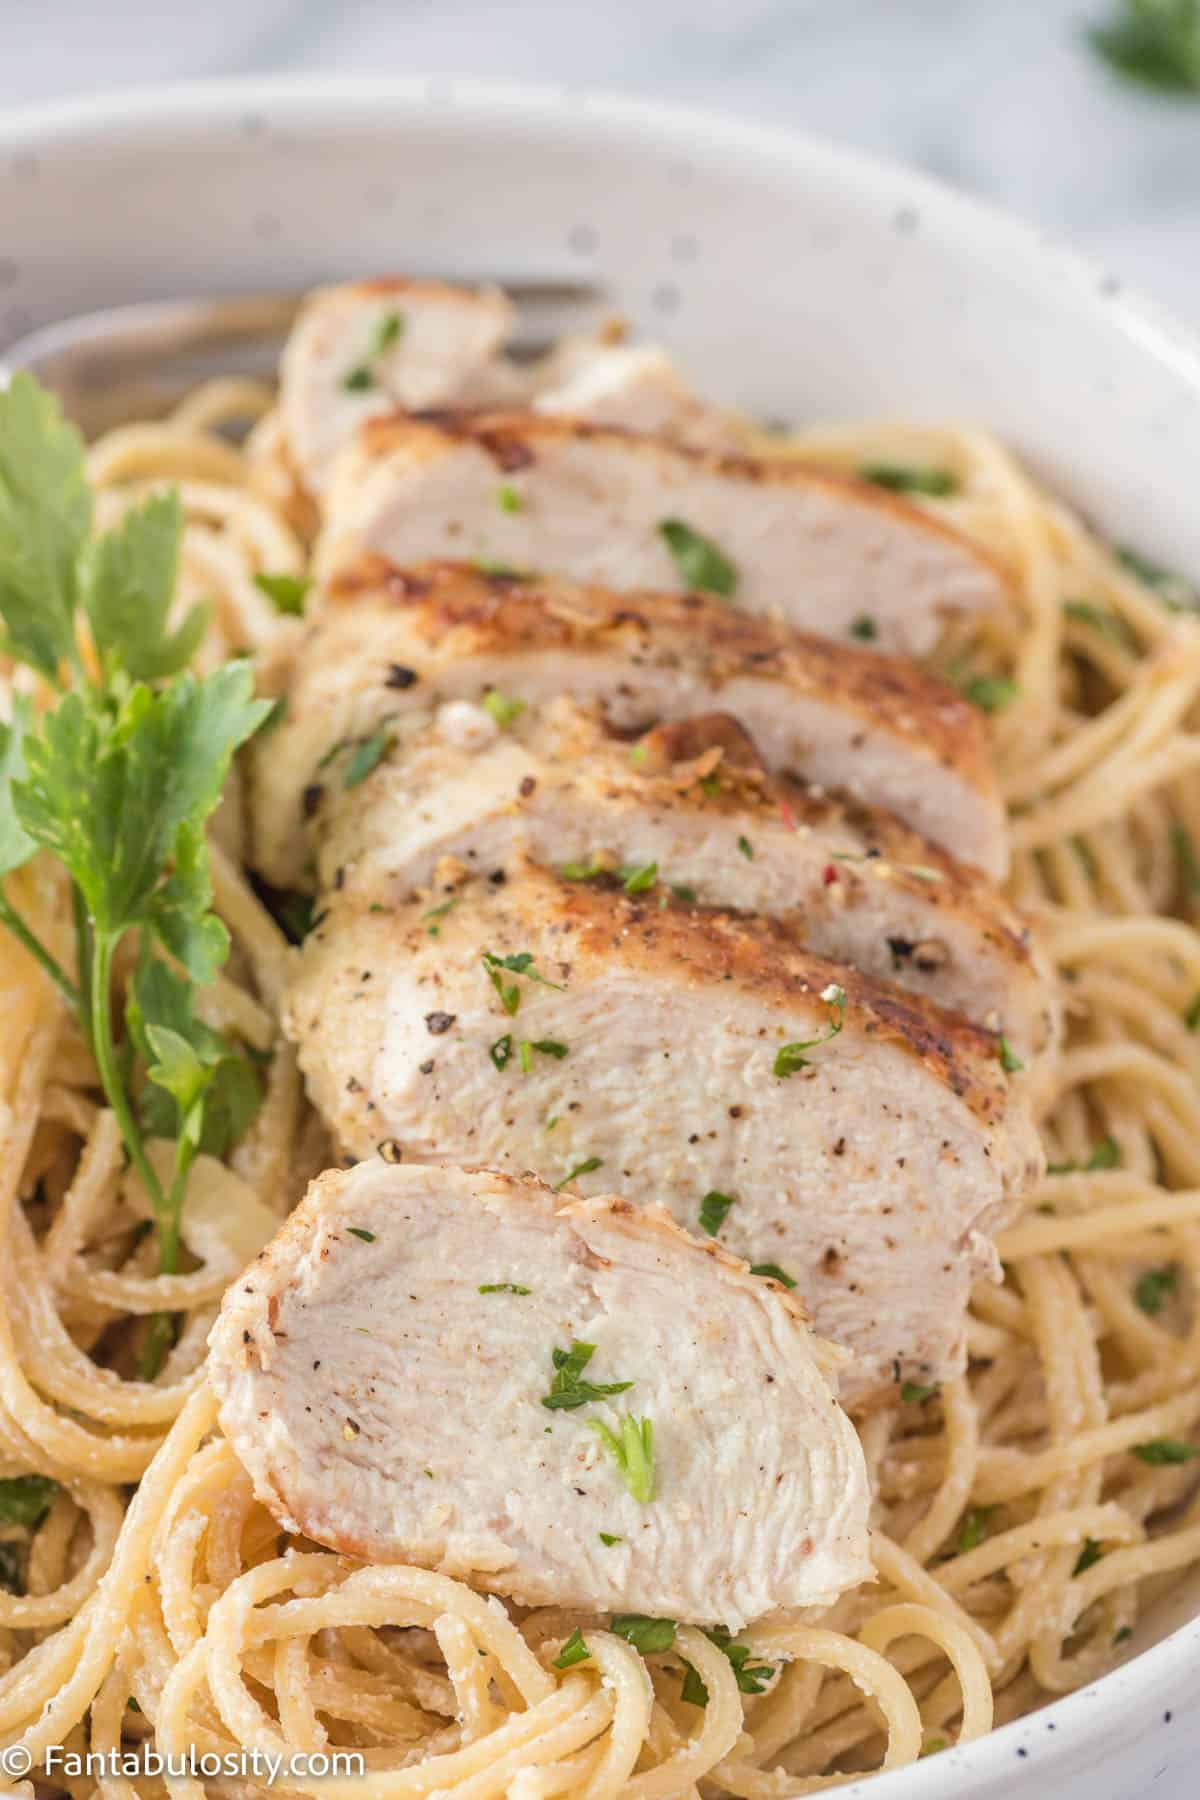 Close up of cooked spaghetti noodles coated with creamy lemon Parmesan sauce and topped with a sliced chicken breast and fresh parsley